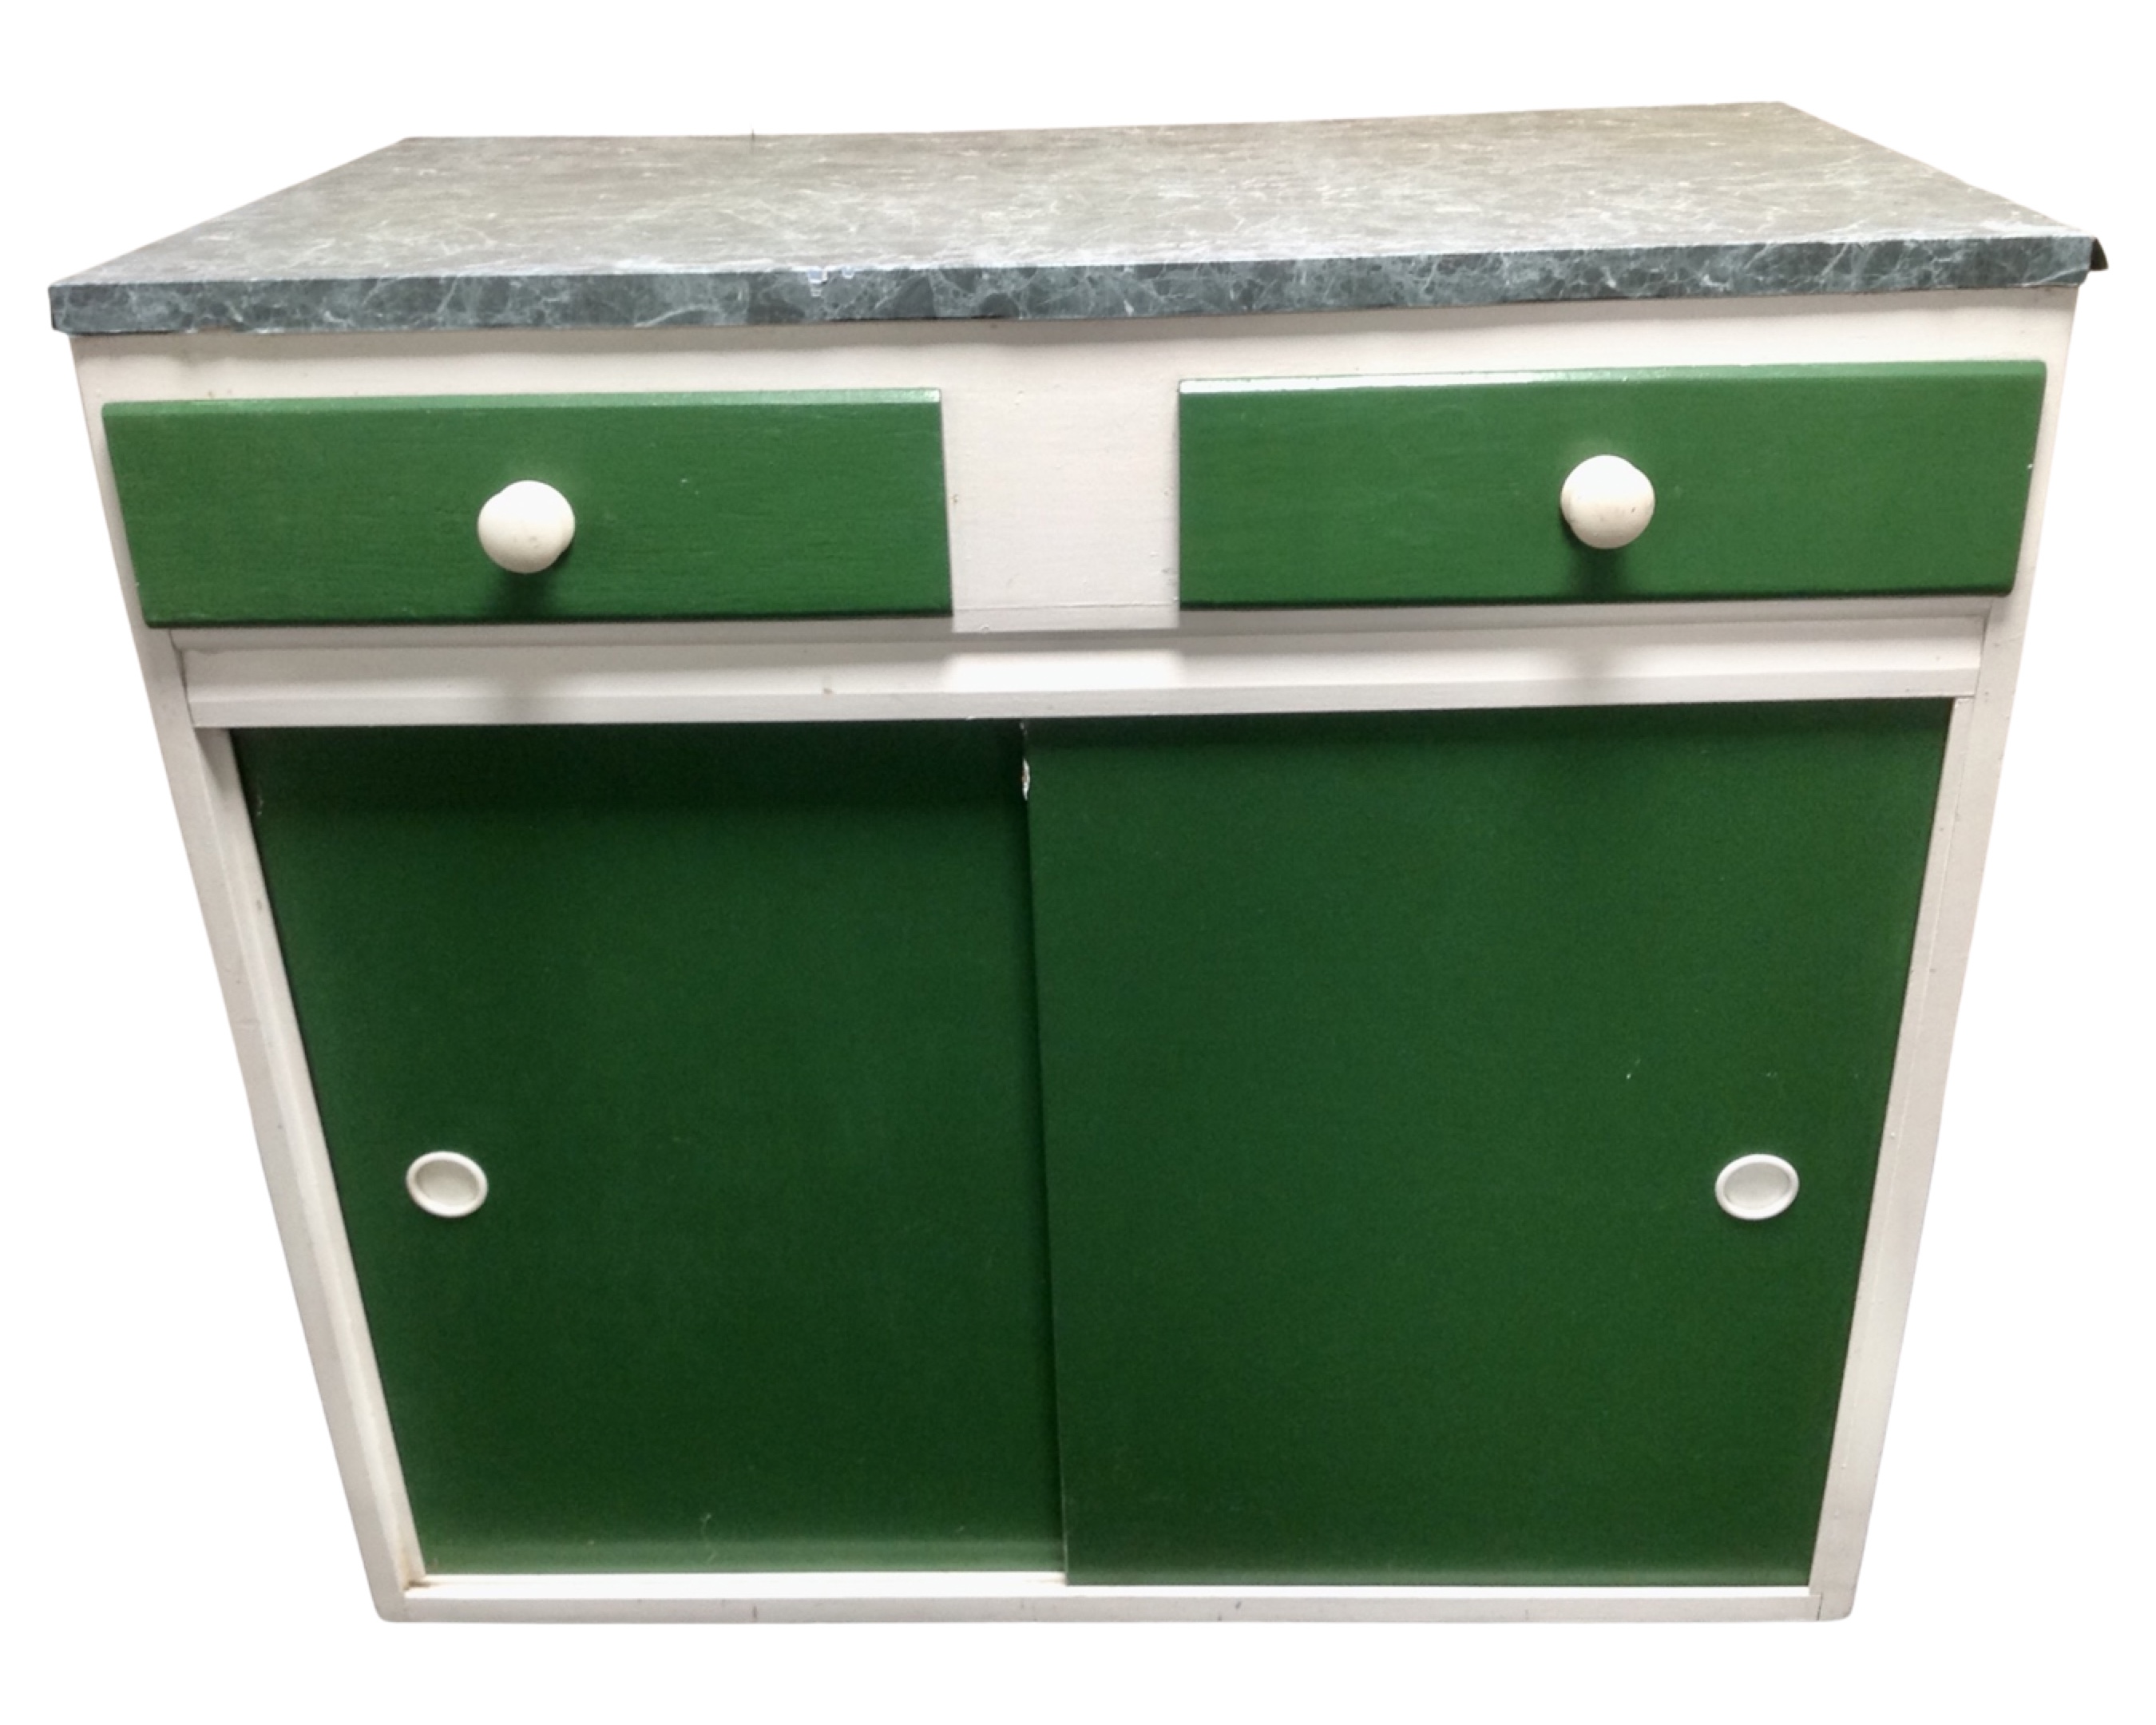 A mid-20th century painted double door kitchen cabinet, fitted with drawers above.